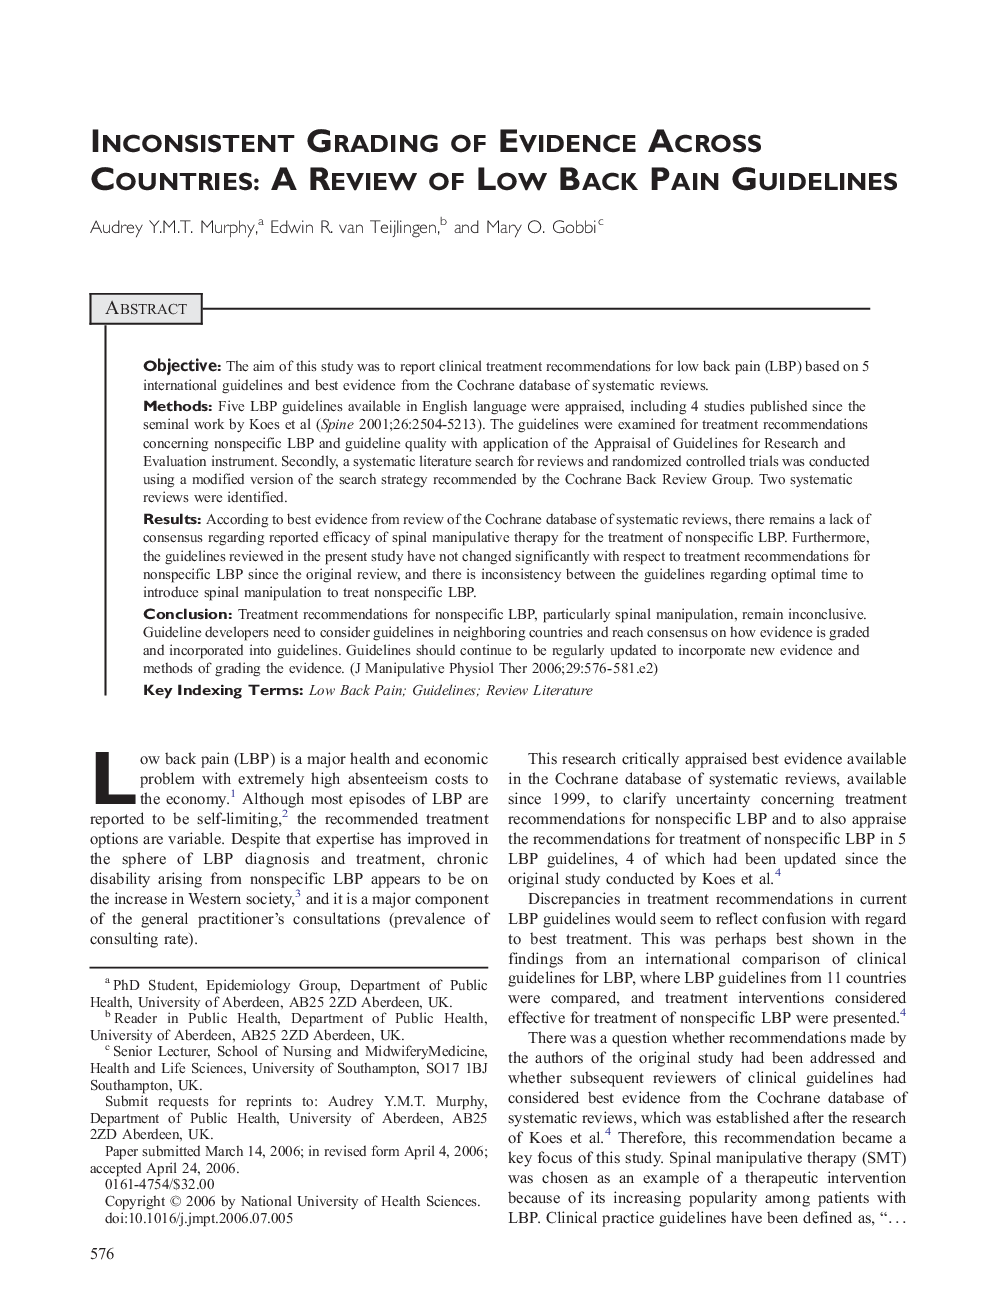 Inconsistent Grading of Evidence Across Countries: A Review of Low Back Pain Guidelines